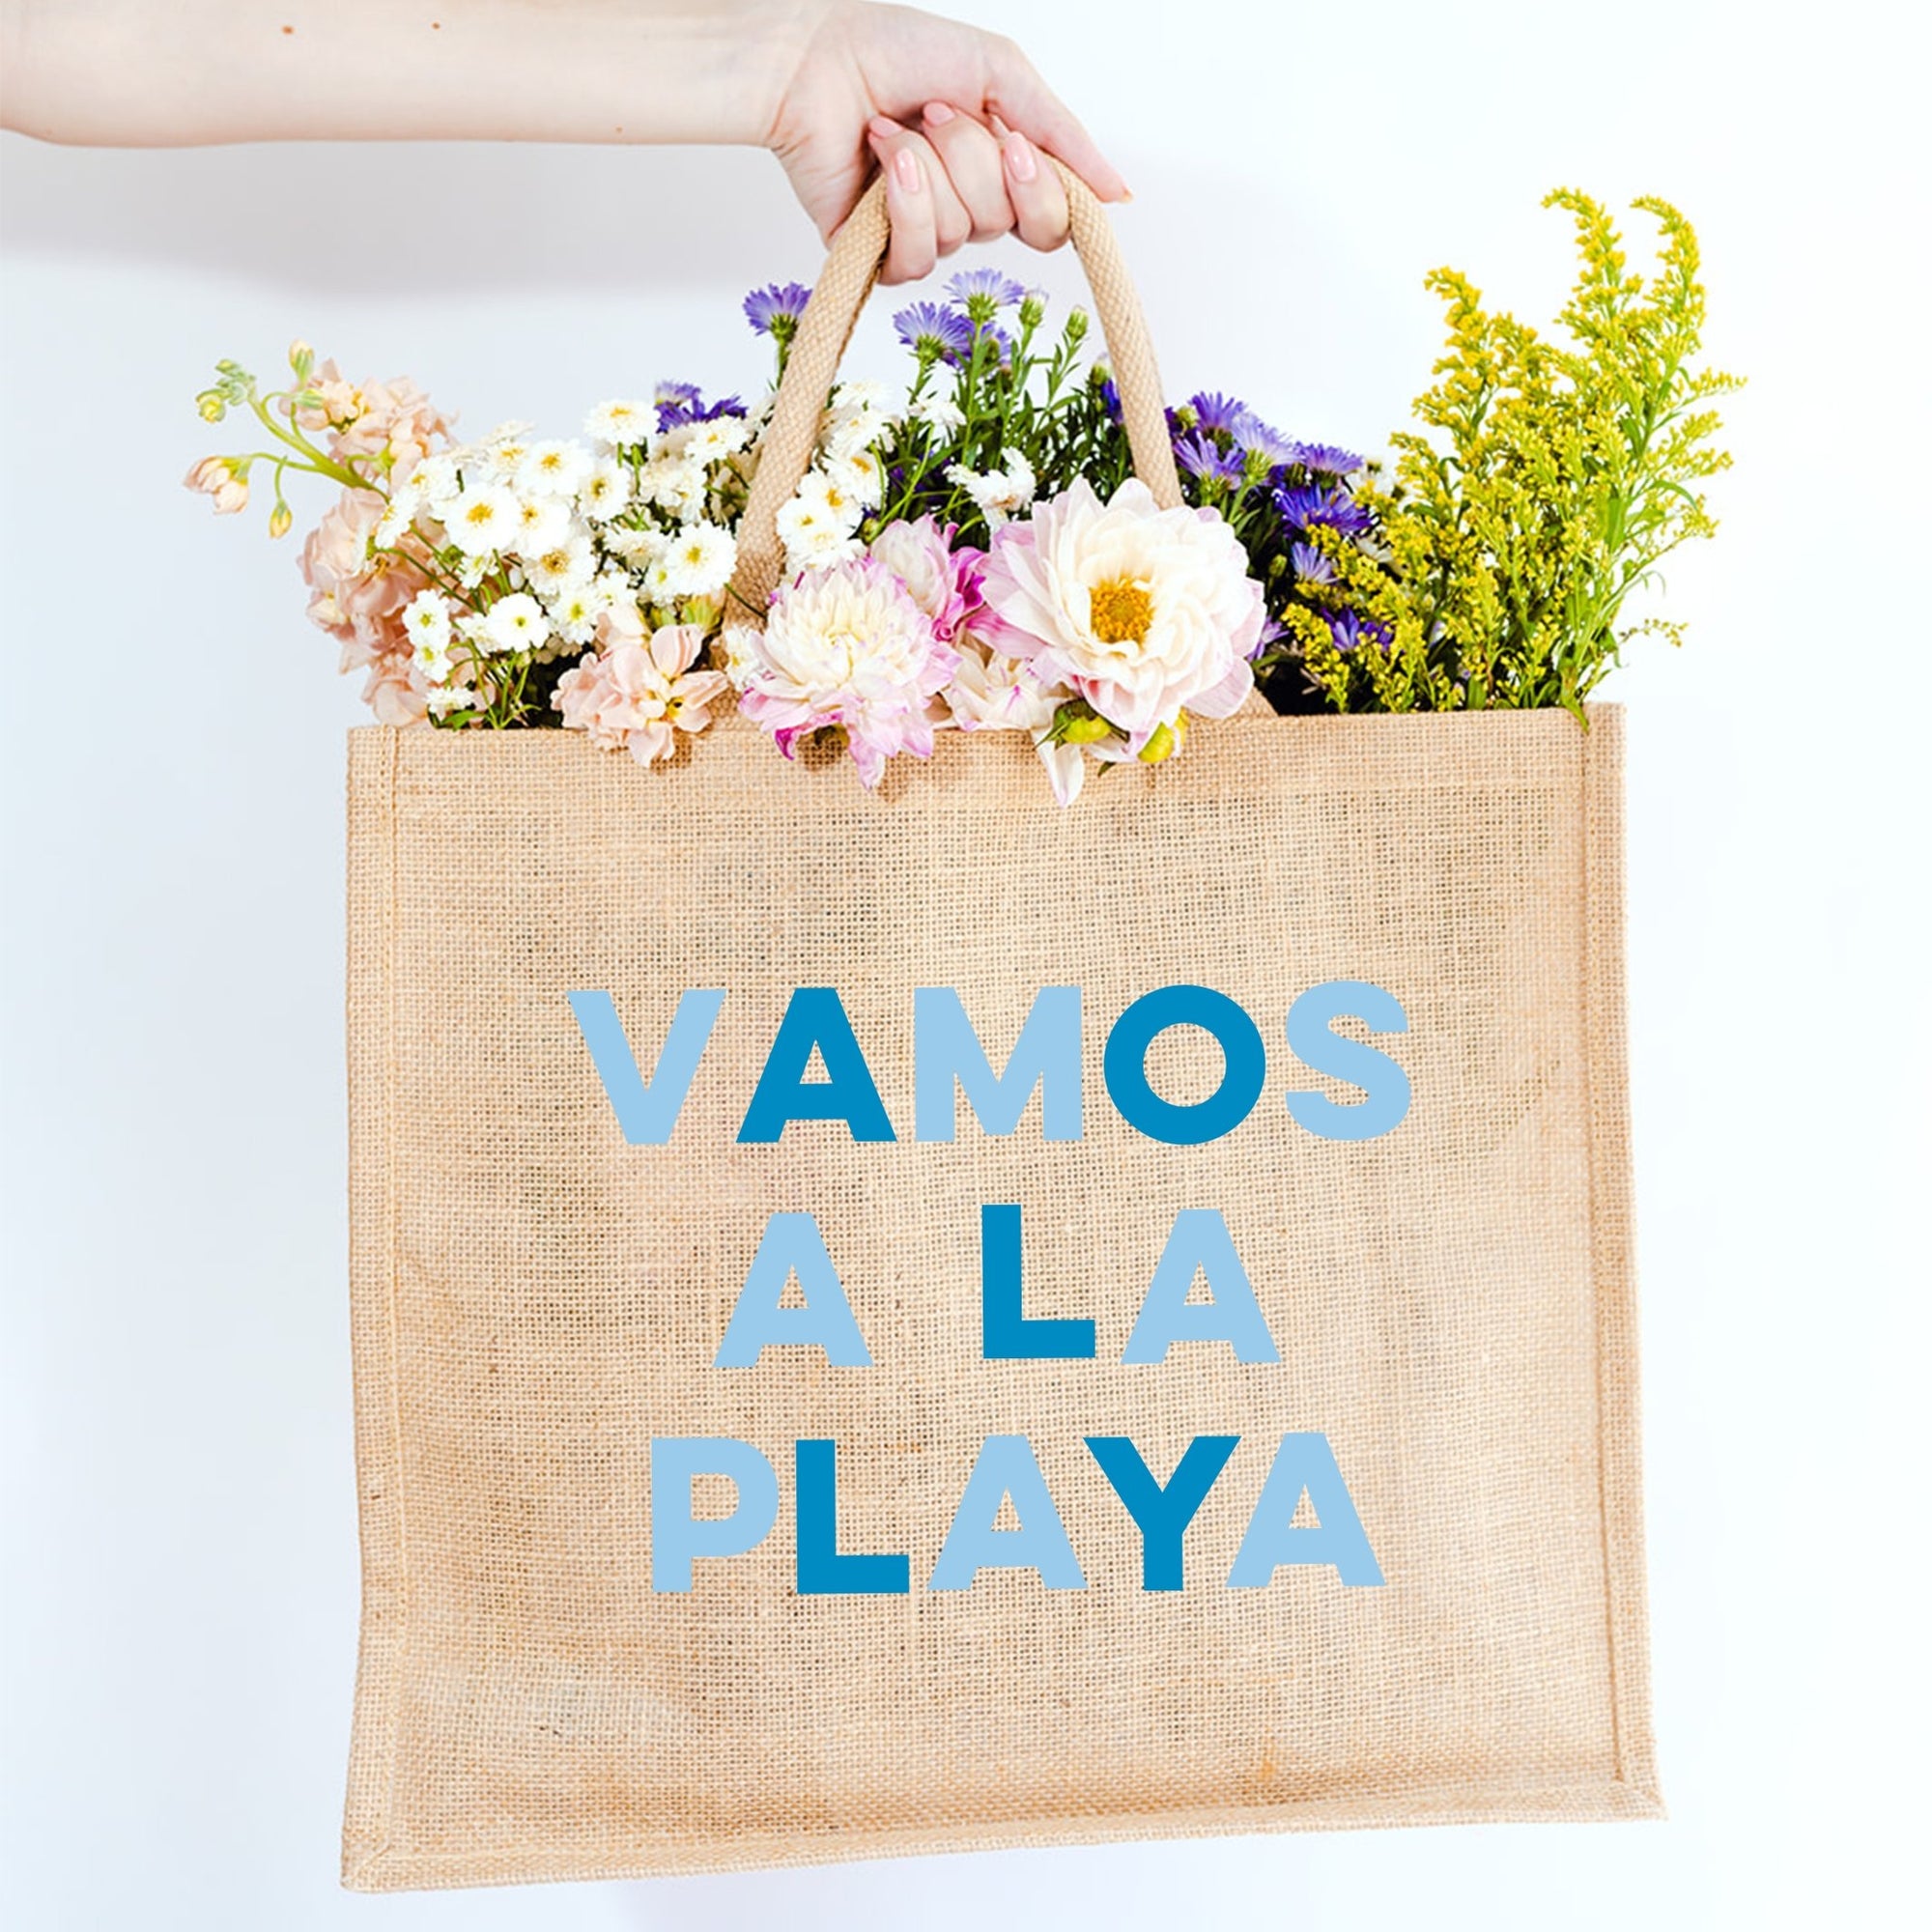 A jute tote reads "VAMOS A LA PLAYA" across the front in red and pink letters